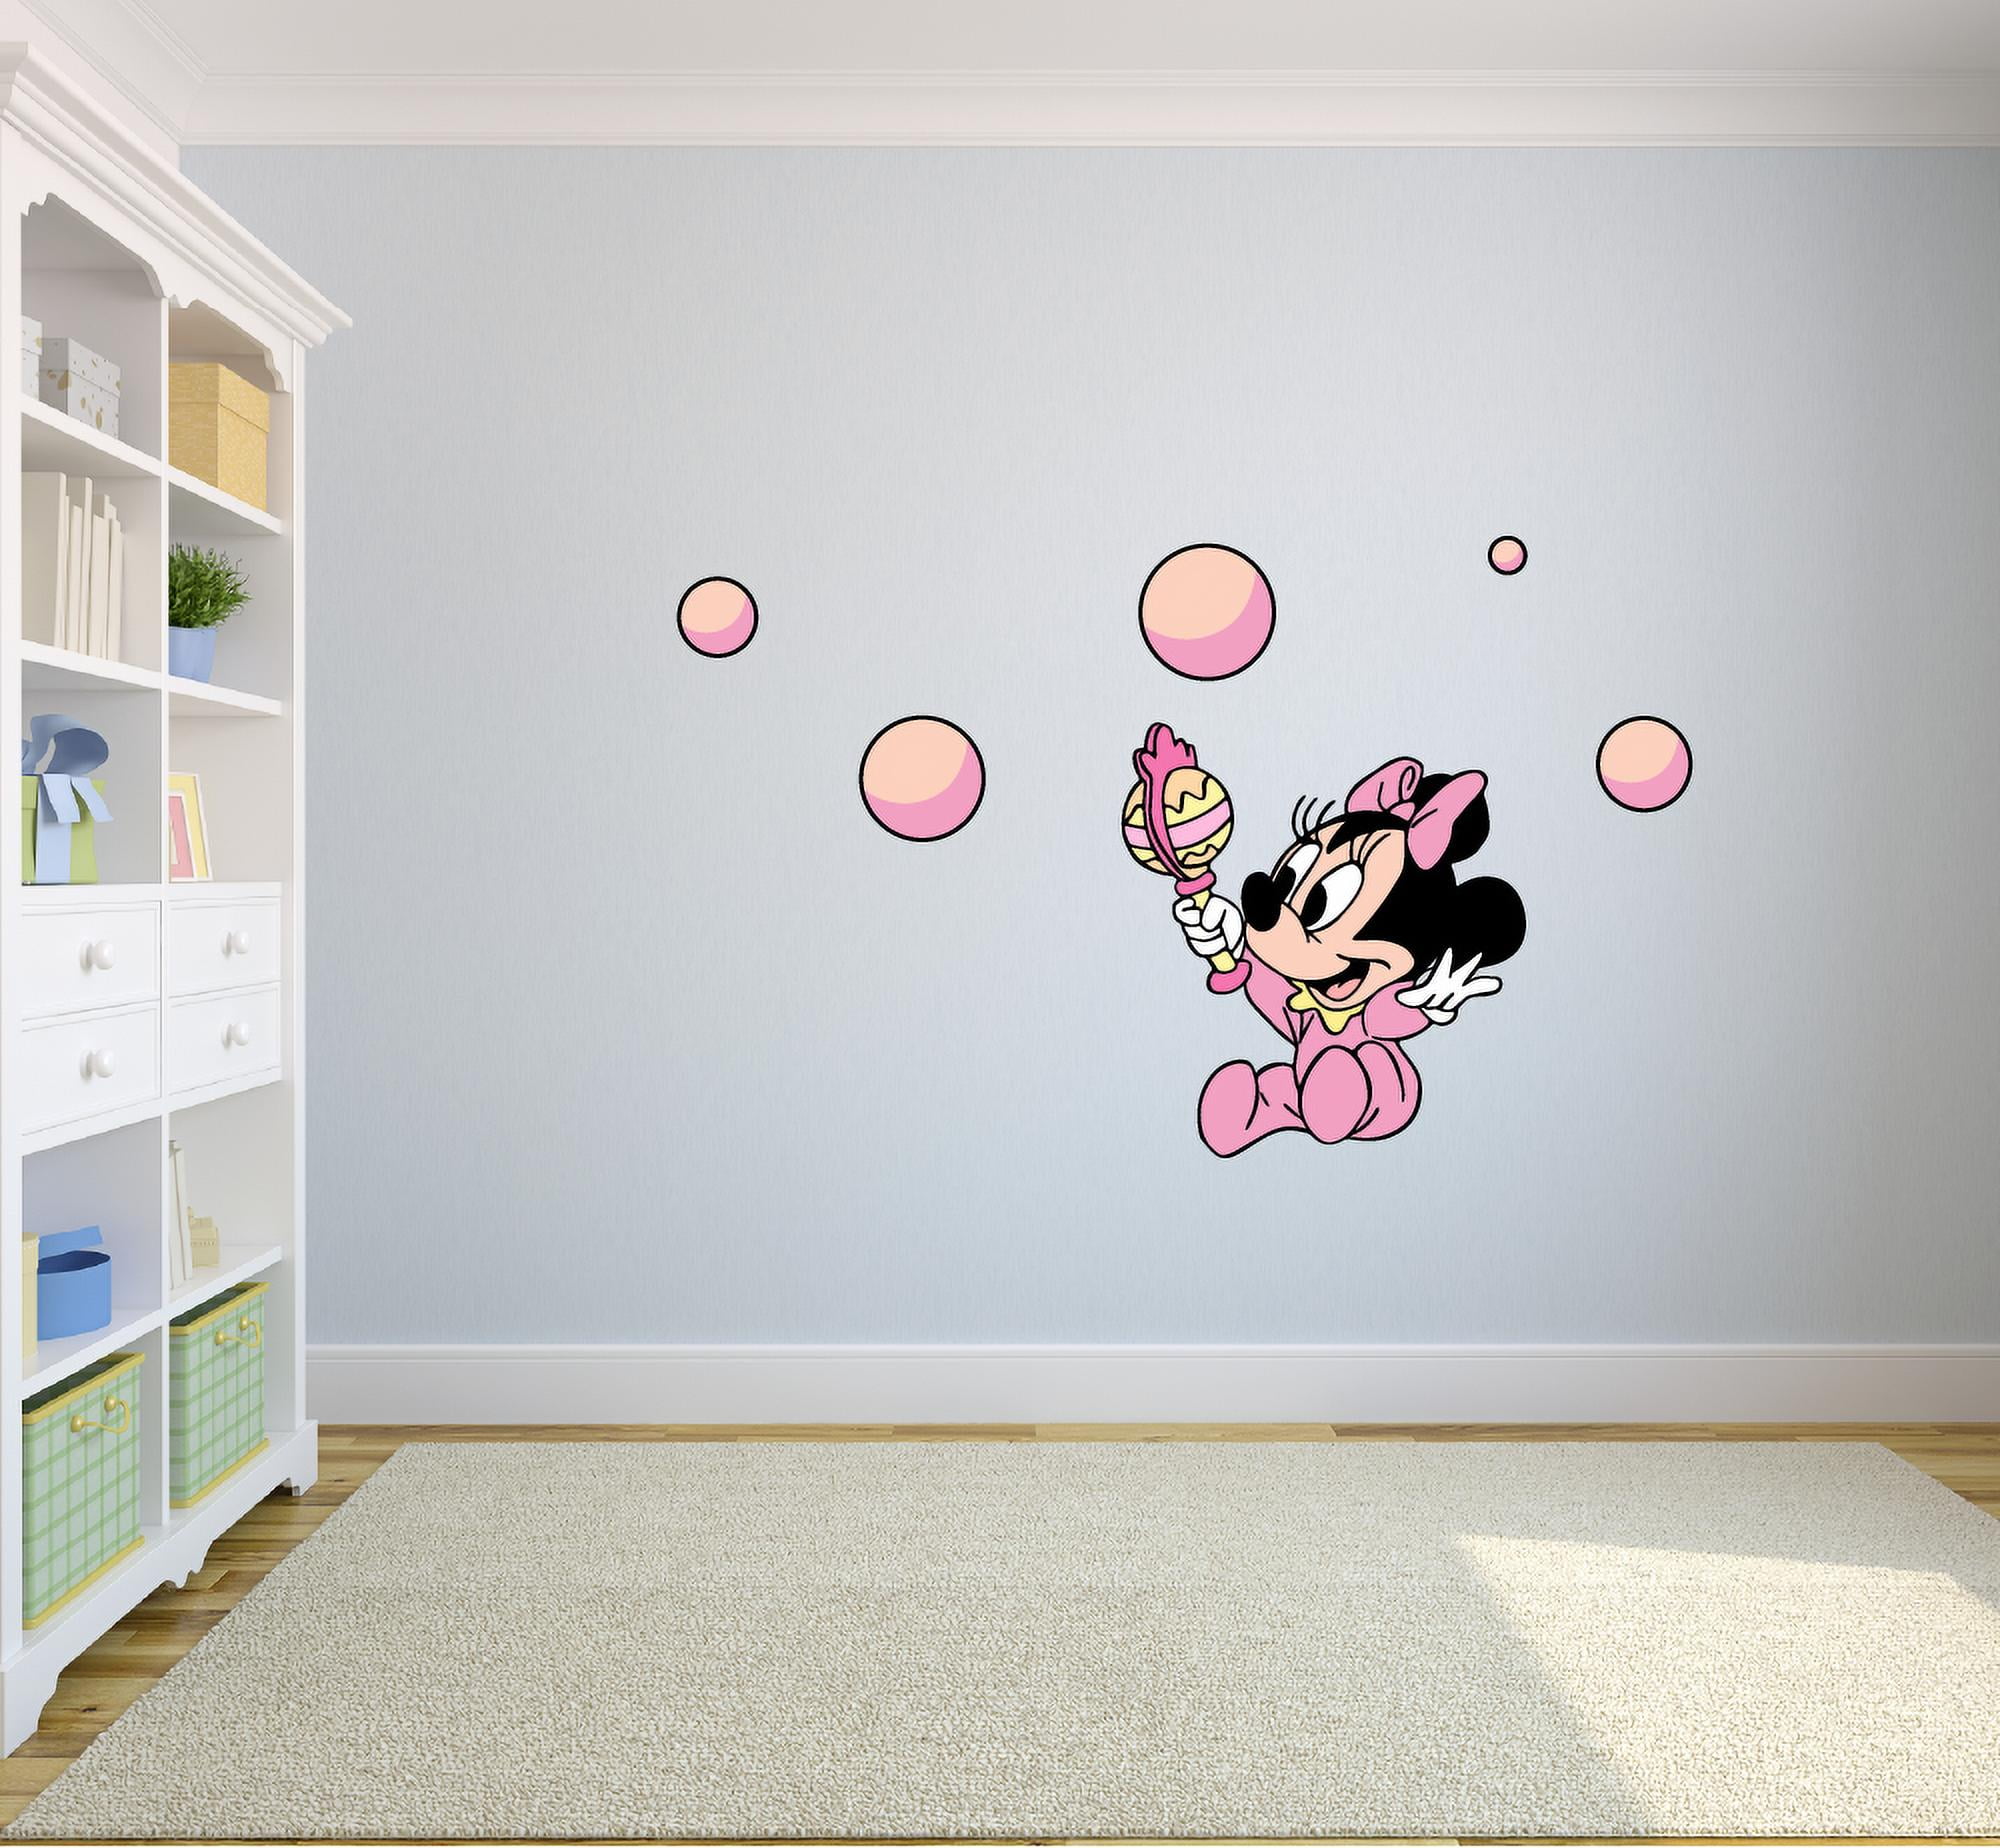 Baby Minnie Mouse Cartoon Character Wall Graphic Decal Sticker Vinyl Mural  Baby Kids Room Bedroom Nursery Kindergarten School House Home Wall Art  Design Removable Peel and Stick 10x8 inch 